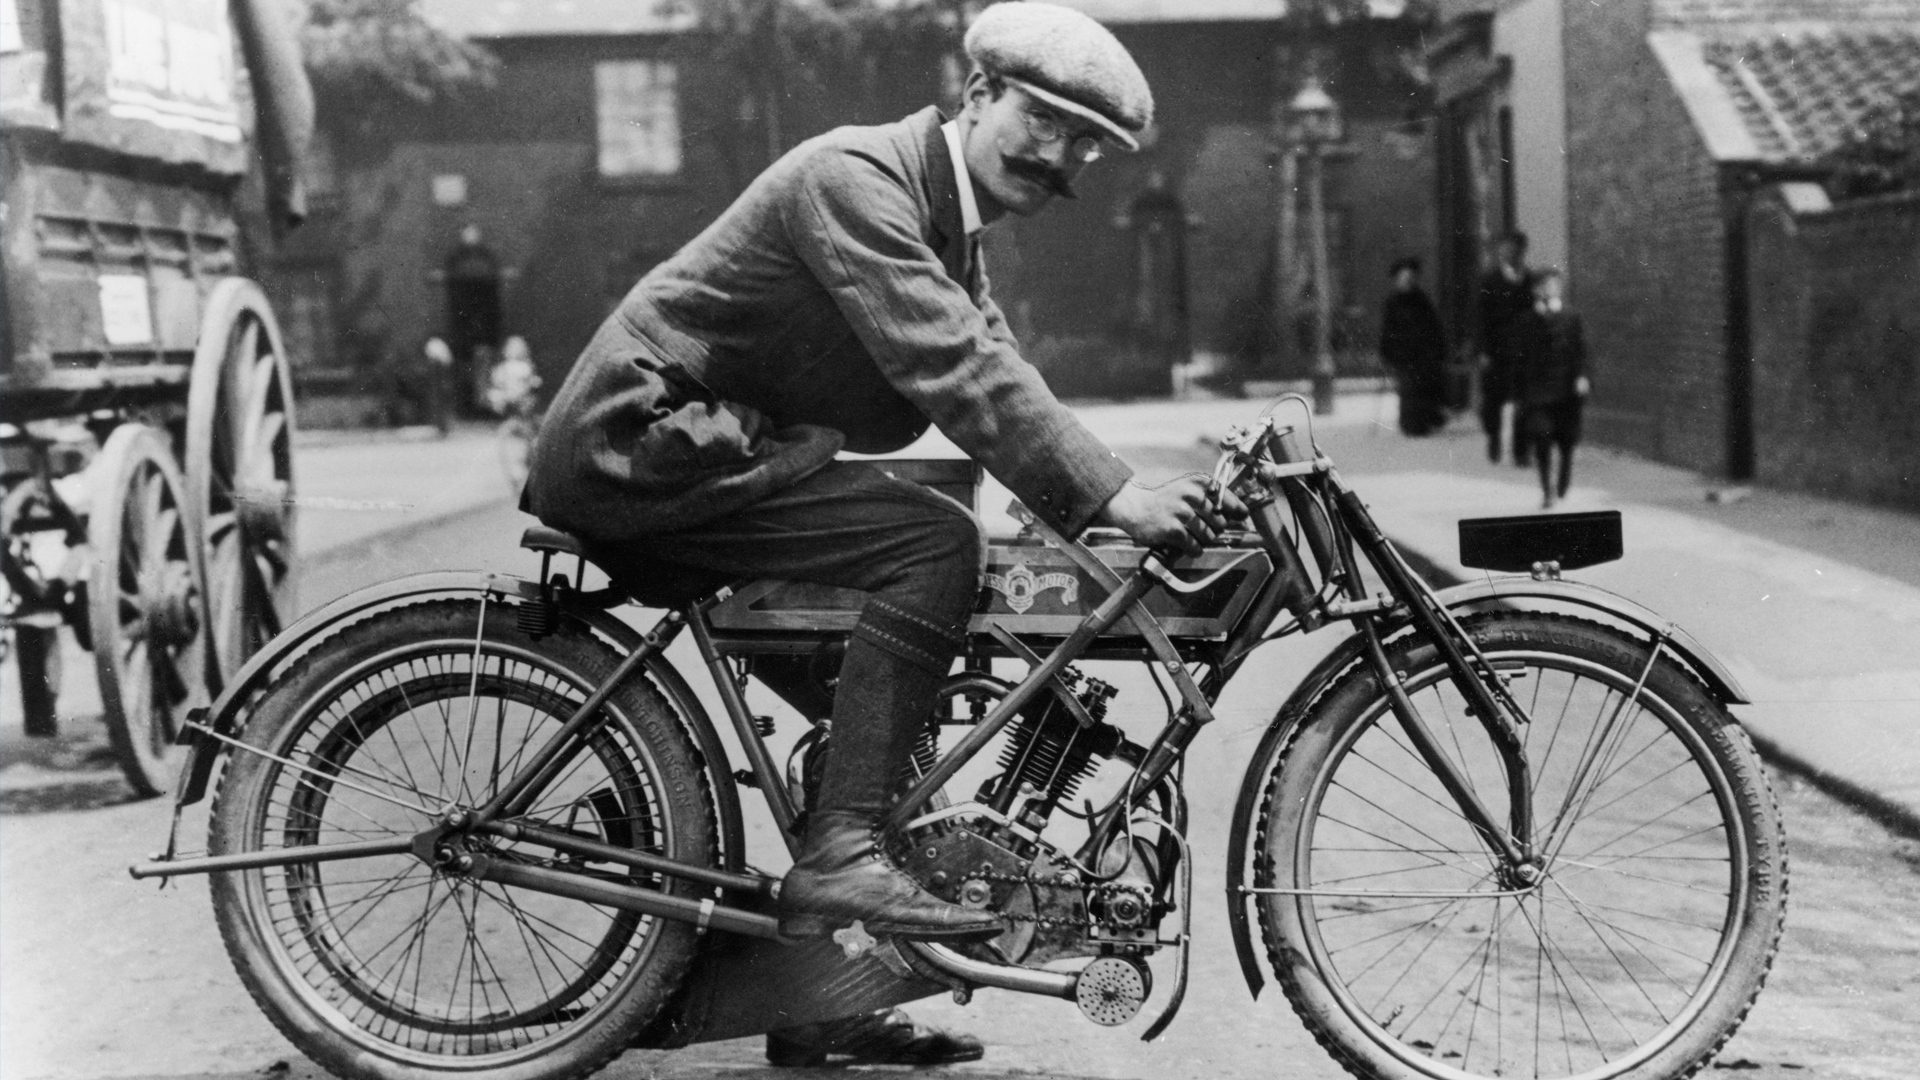 The Beggs Brief - THE MOST DANGEROUS MOTORCYCLE RACE IN HISTORY: THE